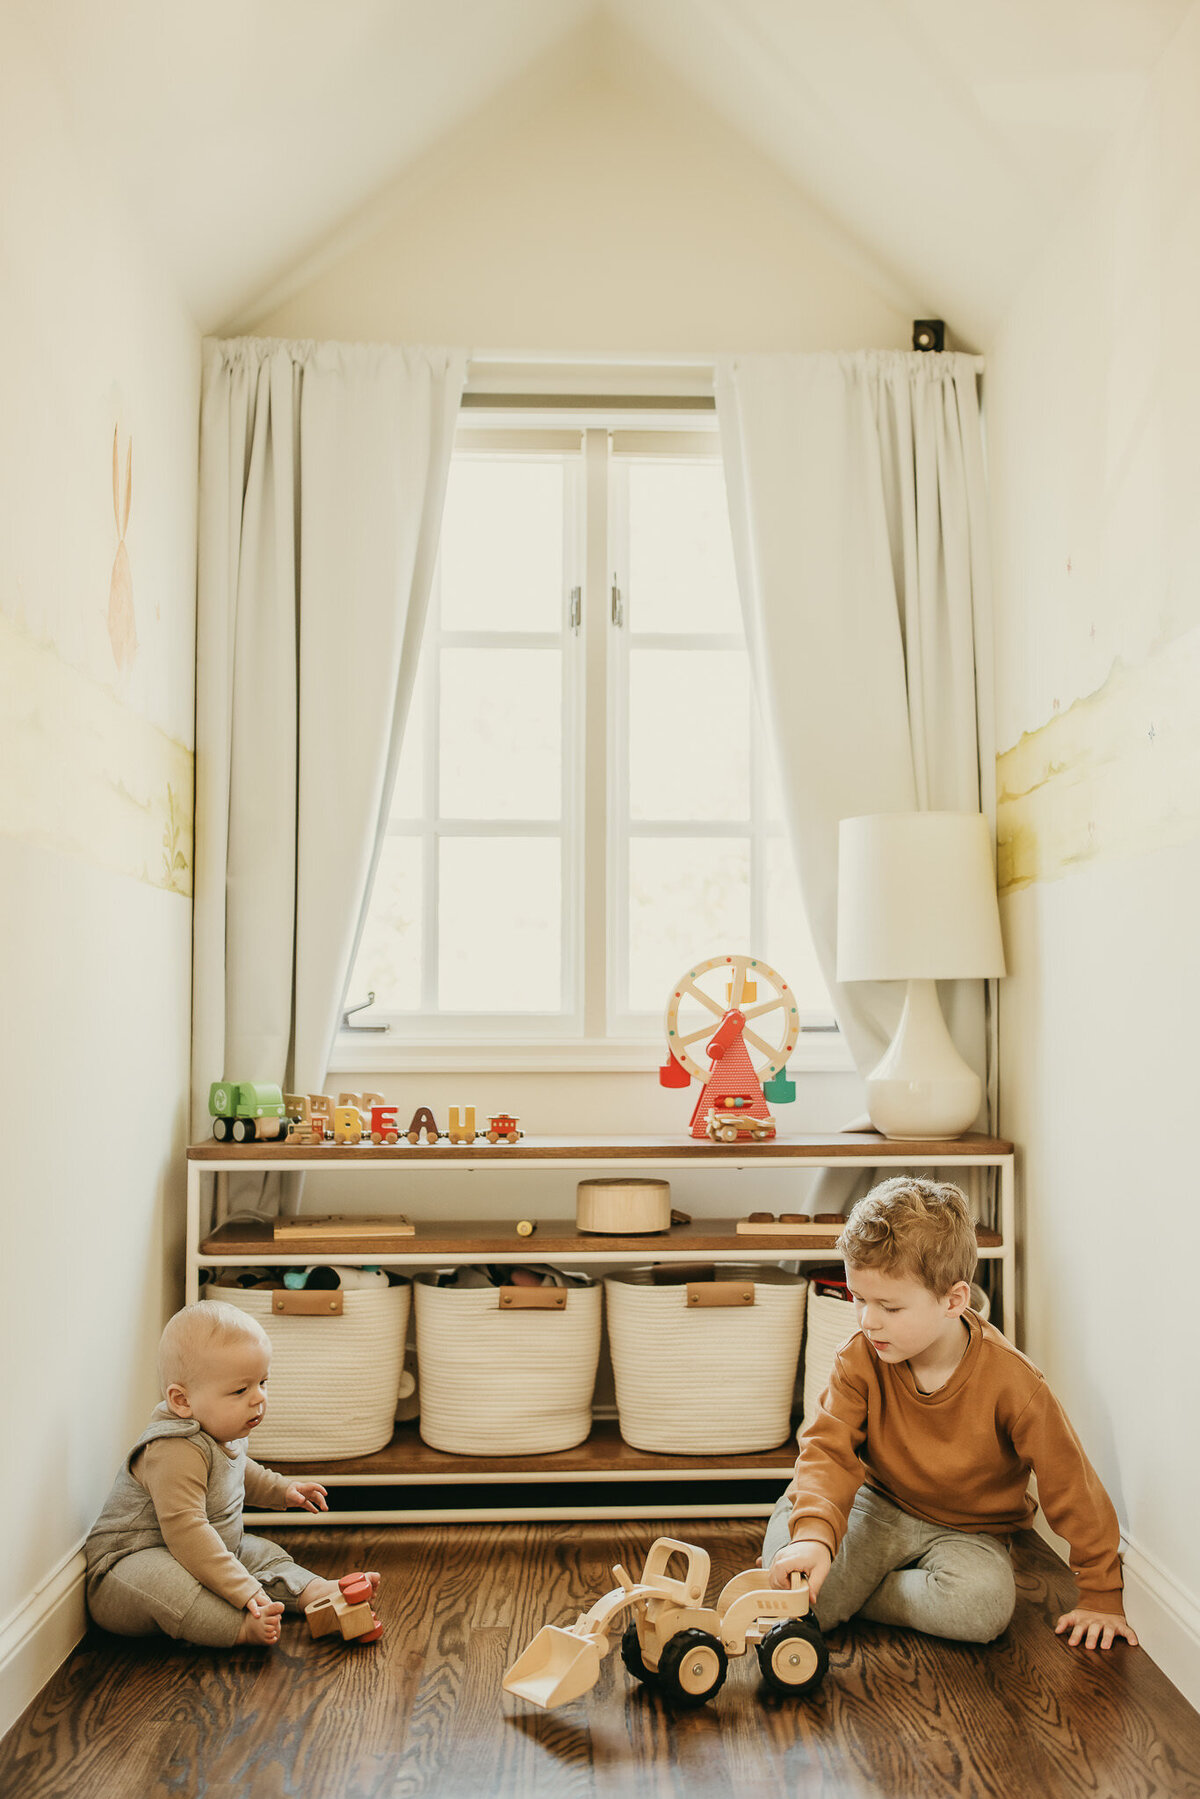 Bay area brothers play with toy truck in front of bedroom window during in home family photography session